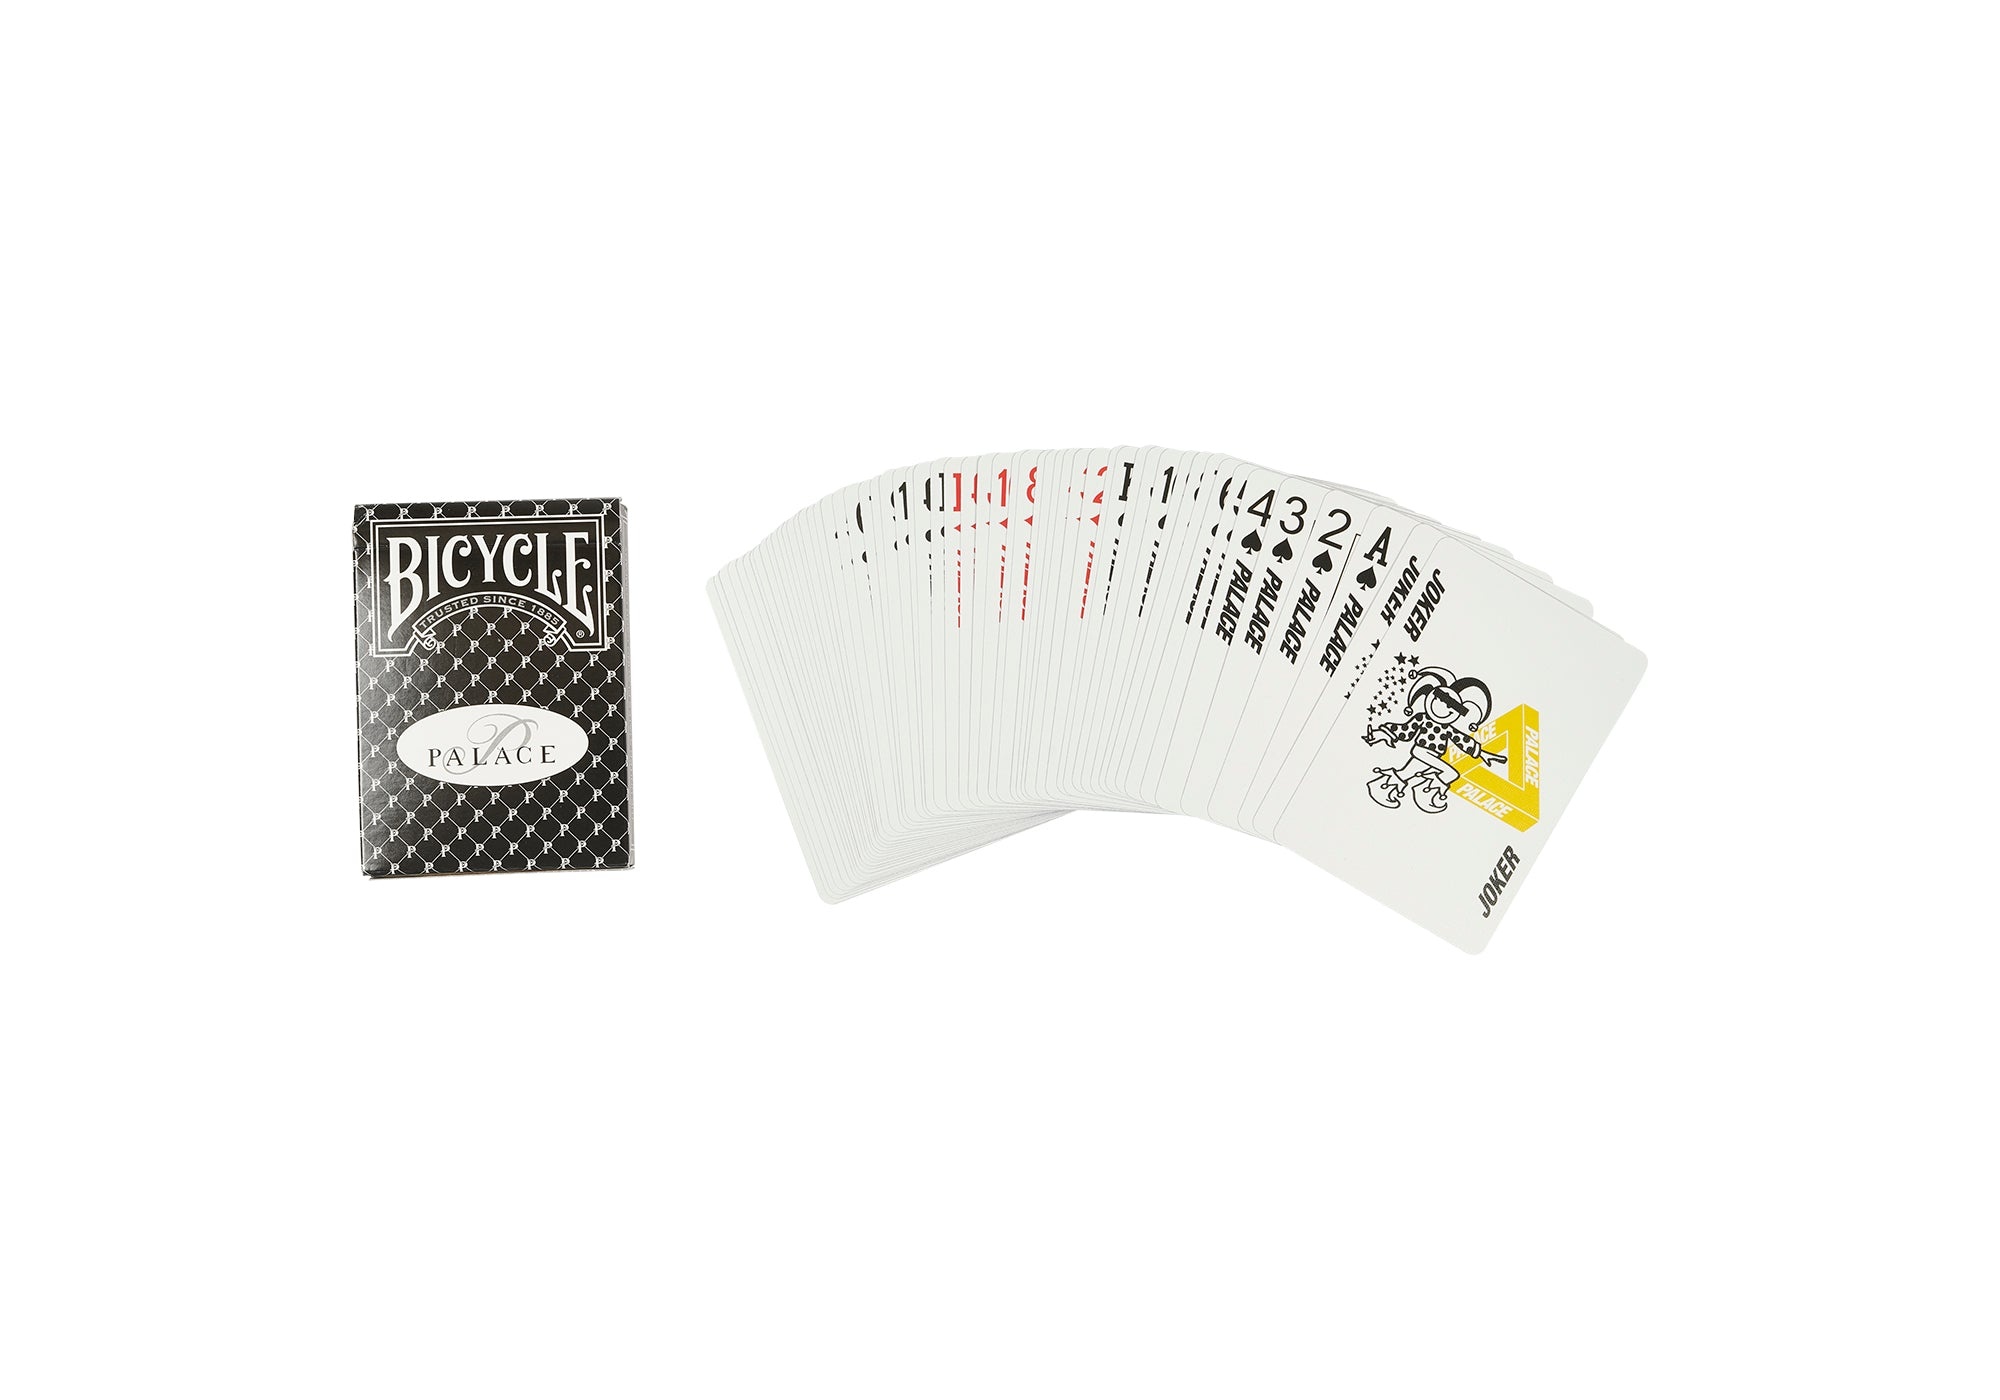 PALACE BICYCLE PLAYING CARDS MULTI - 2